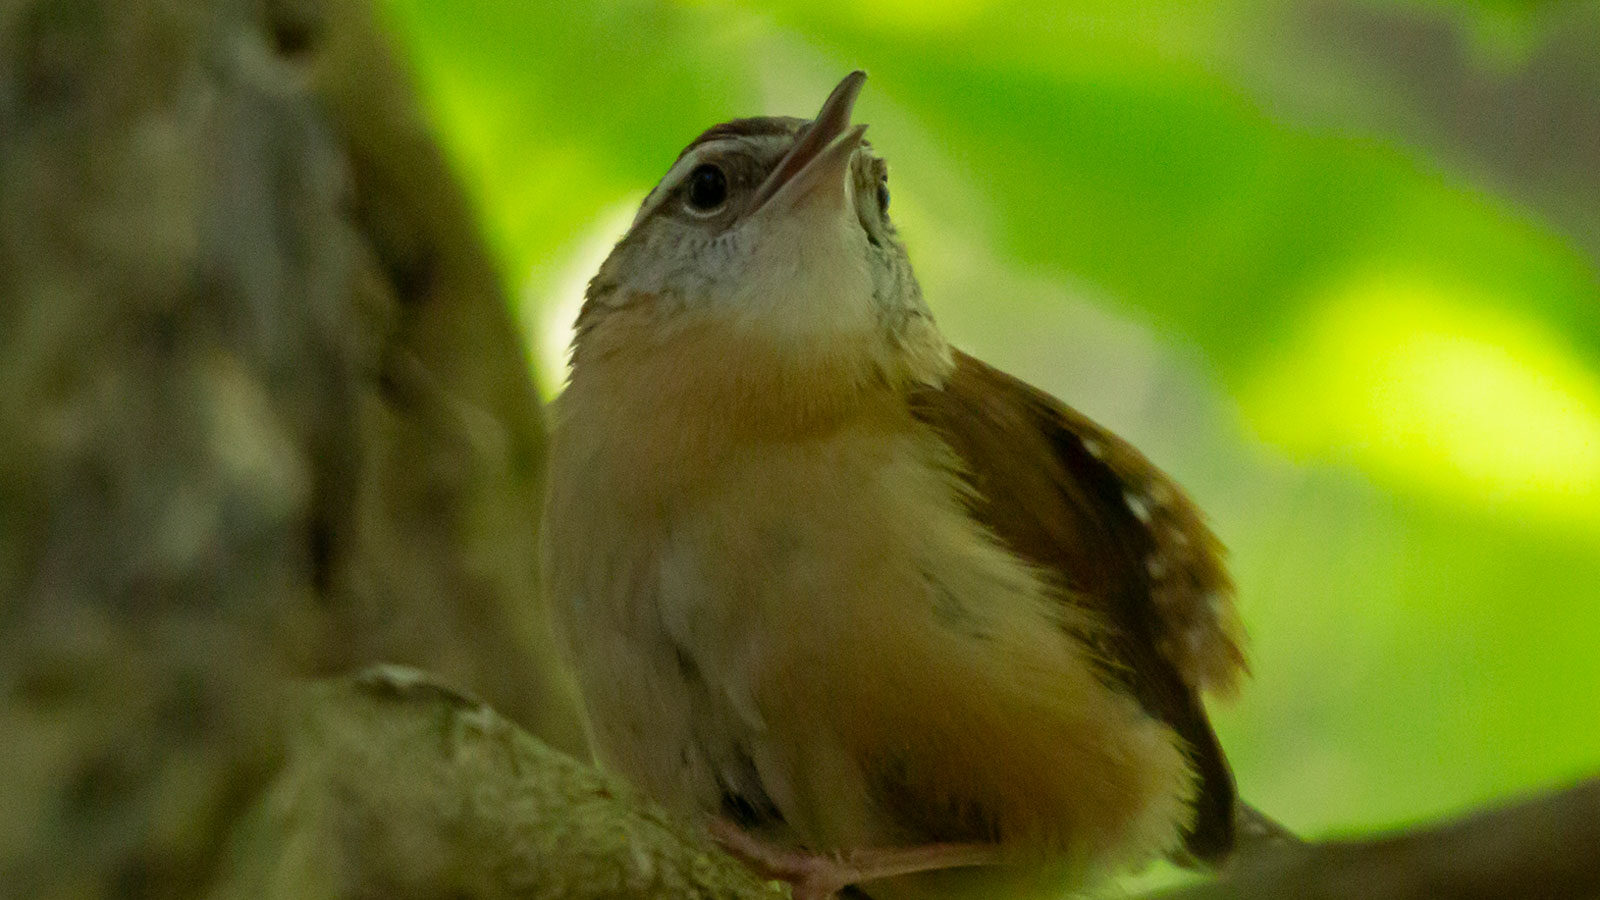 Carolina wren chirping as it fluffs out in a defensive posture